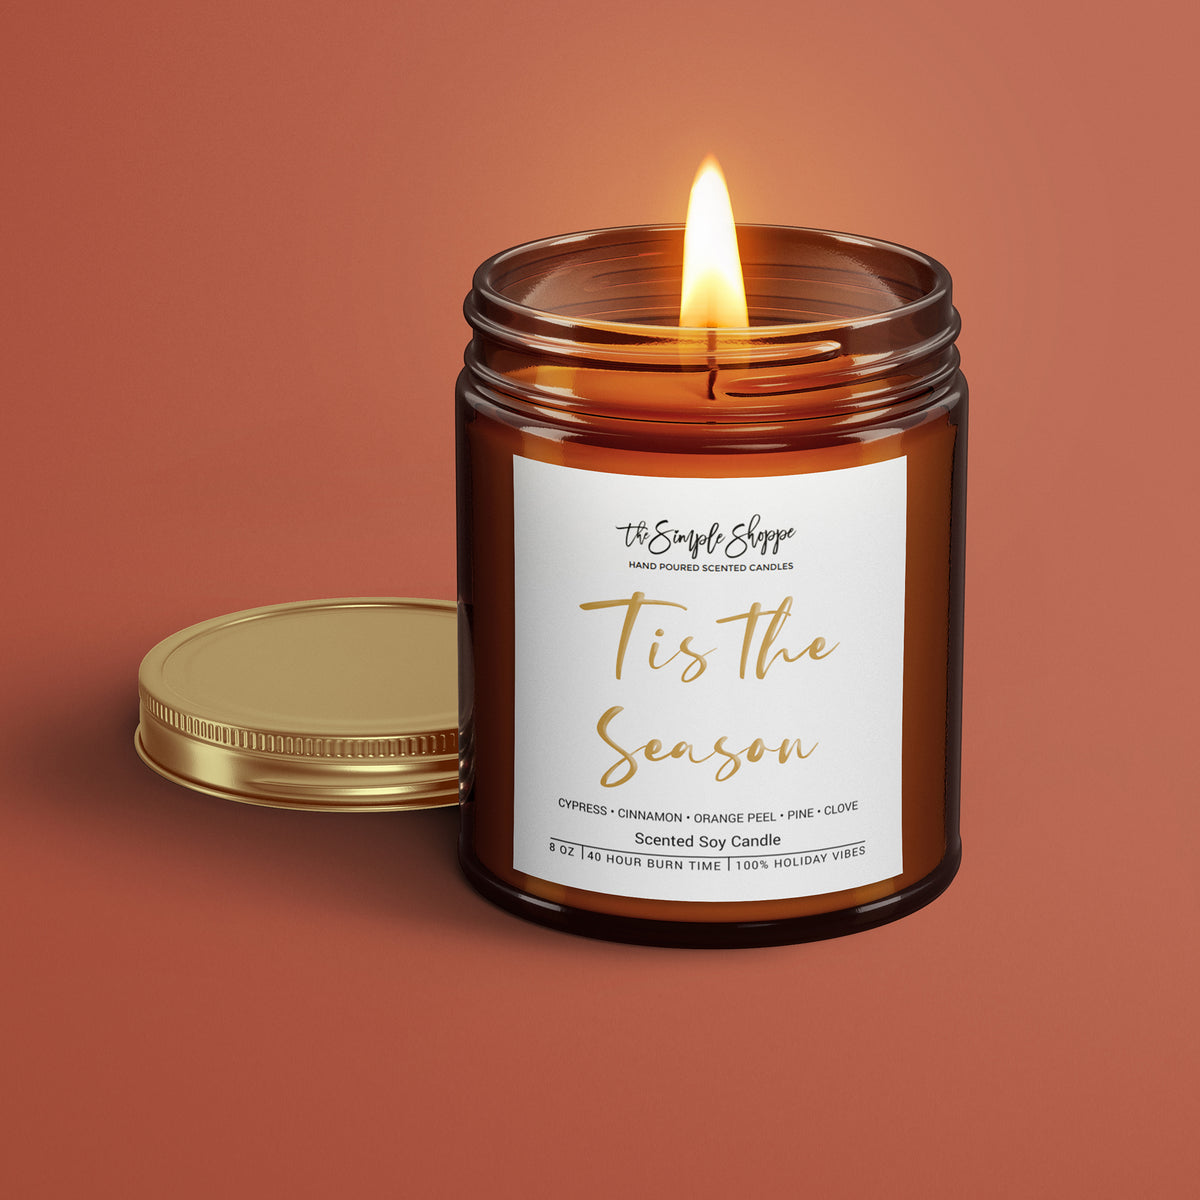 The Best Christmas Candles for Instant Holiday Vibes [Updated]